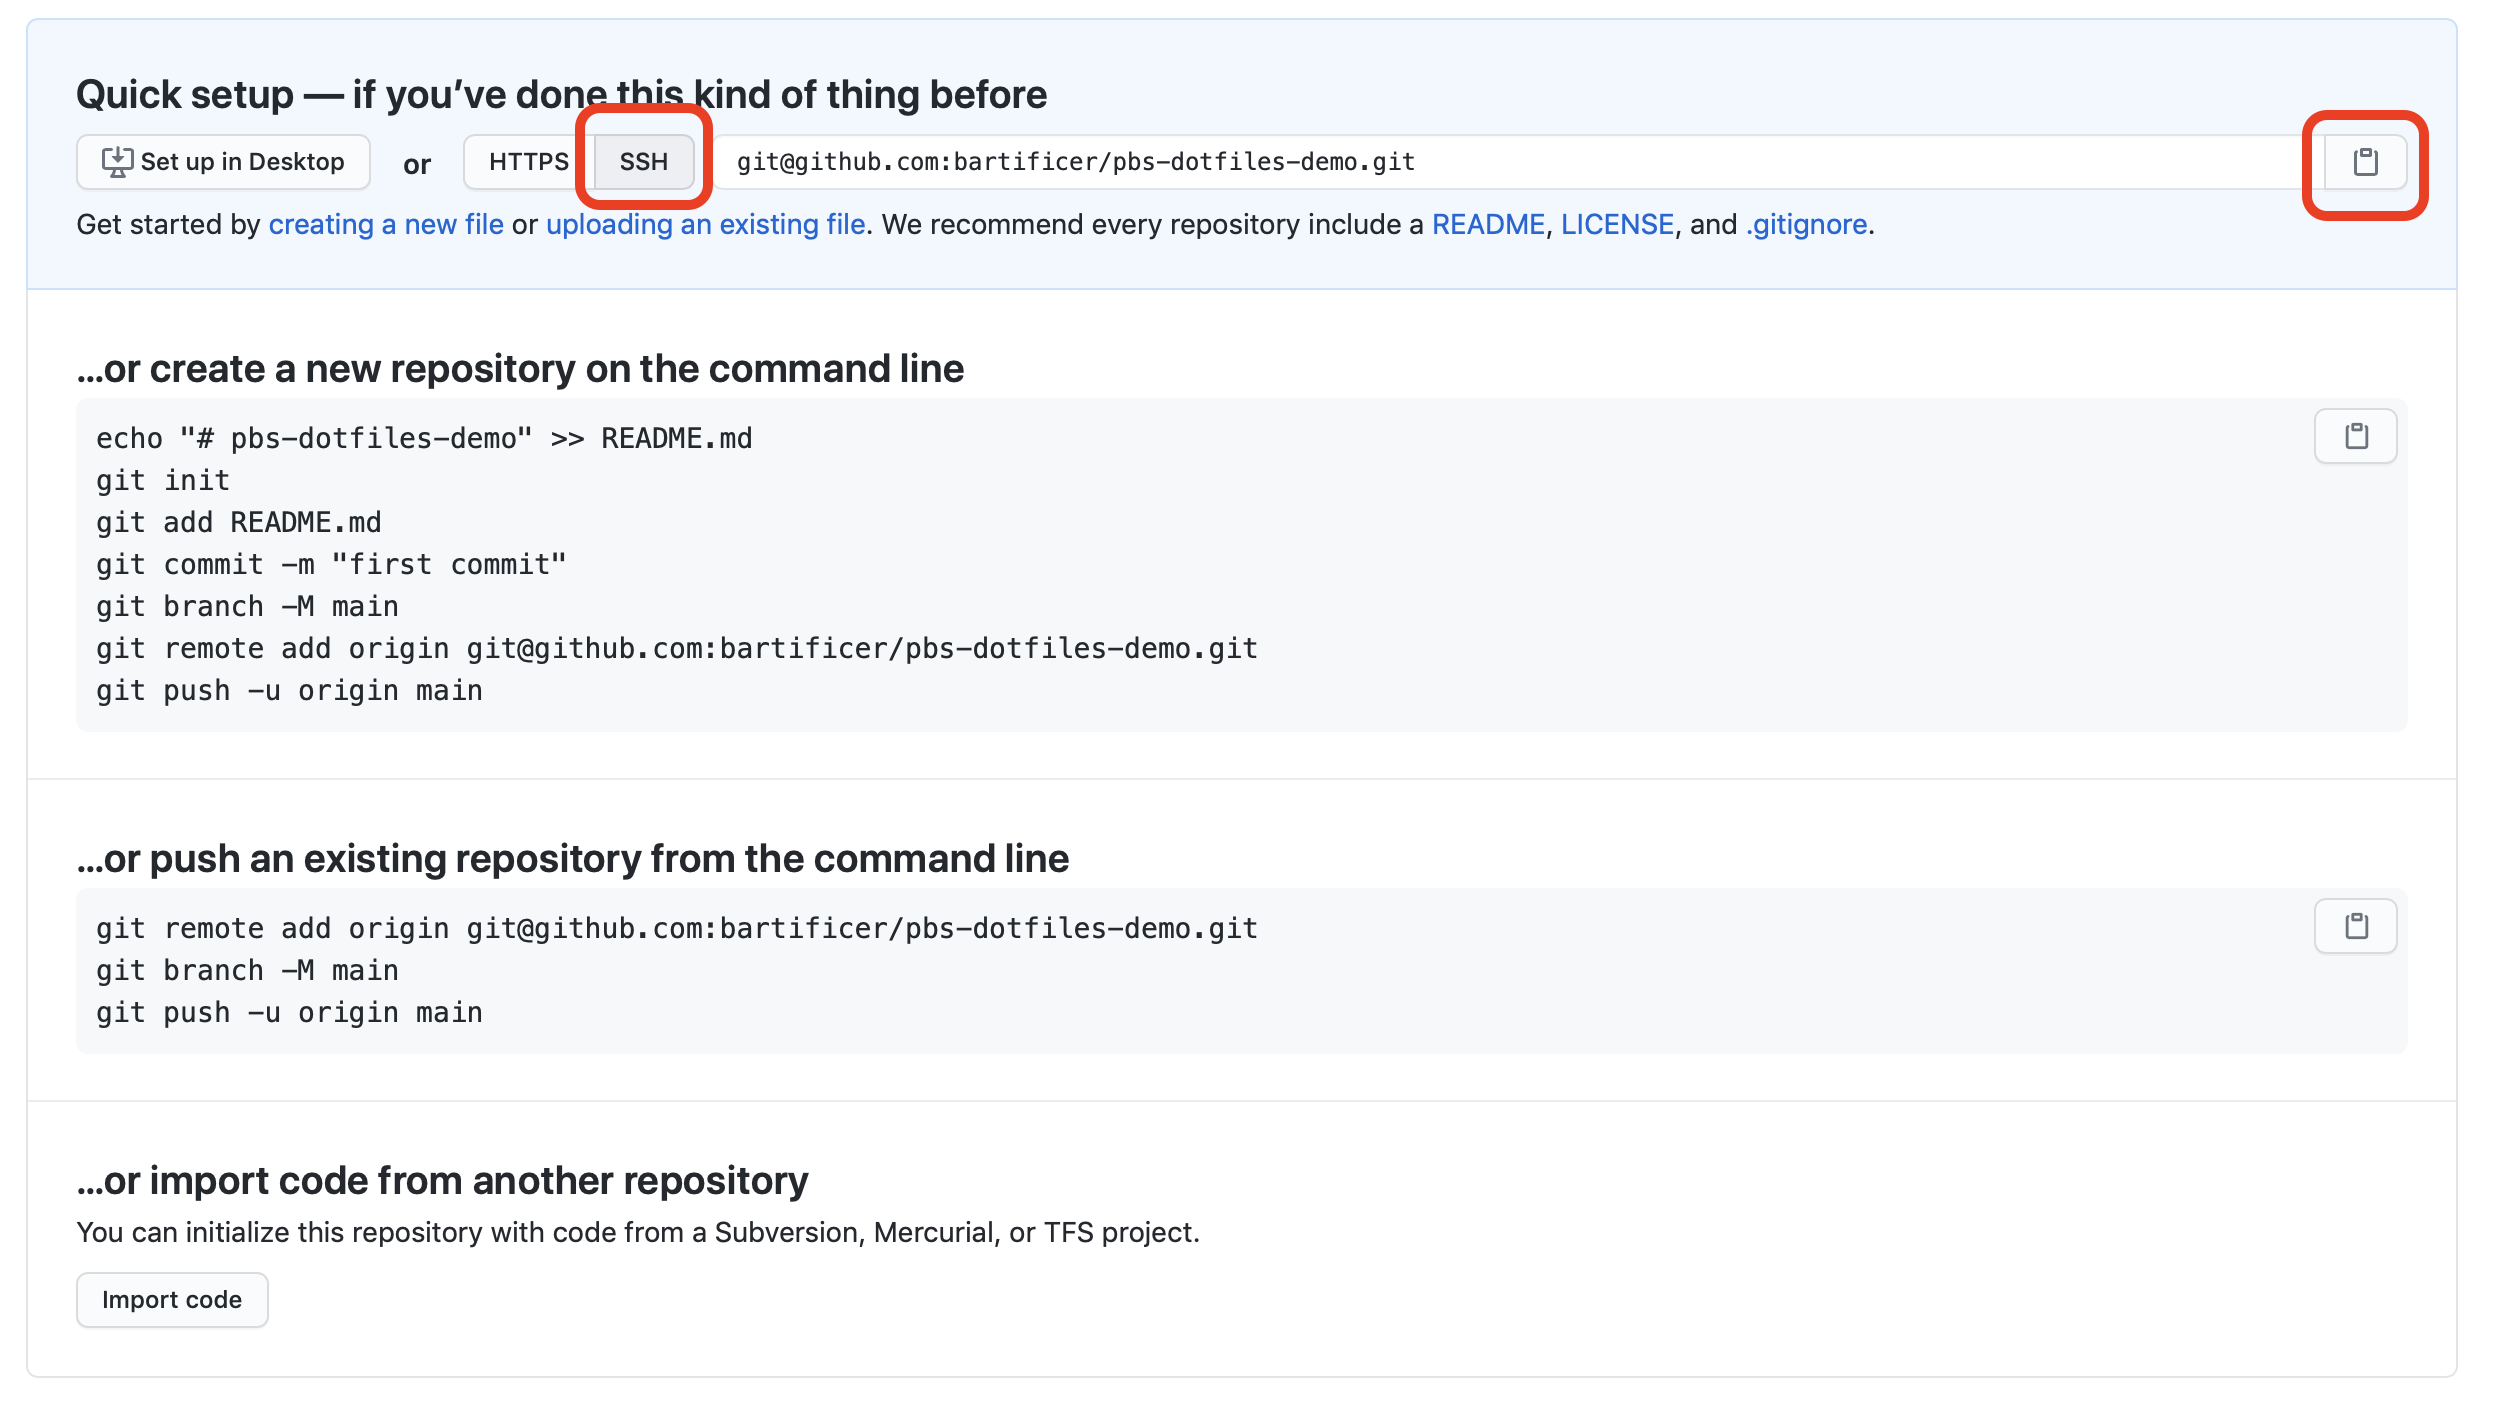 A screenshot showing how to copy the URL for a new a private empty GitHub repo by being sure SSH is selected and then clicking the button to copy the URL